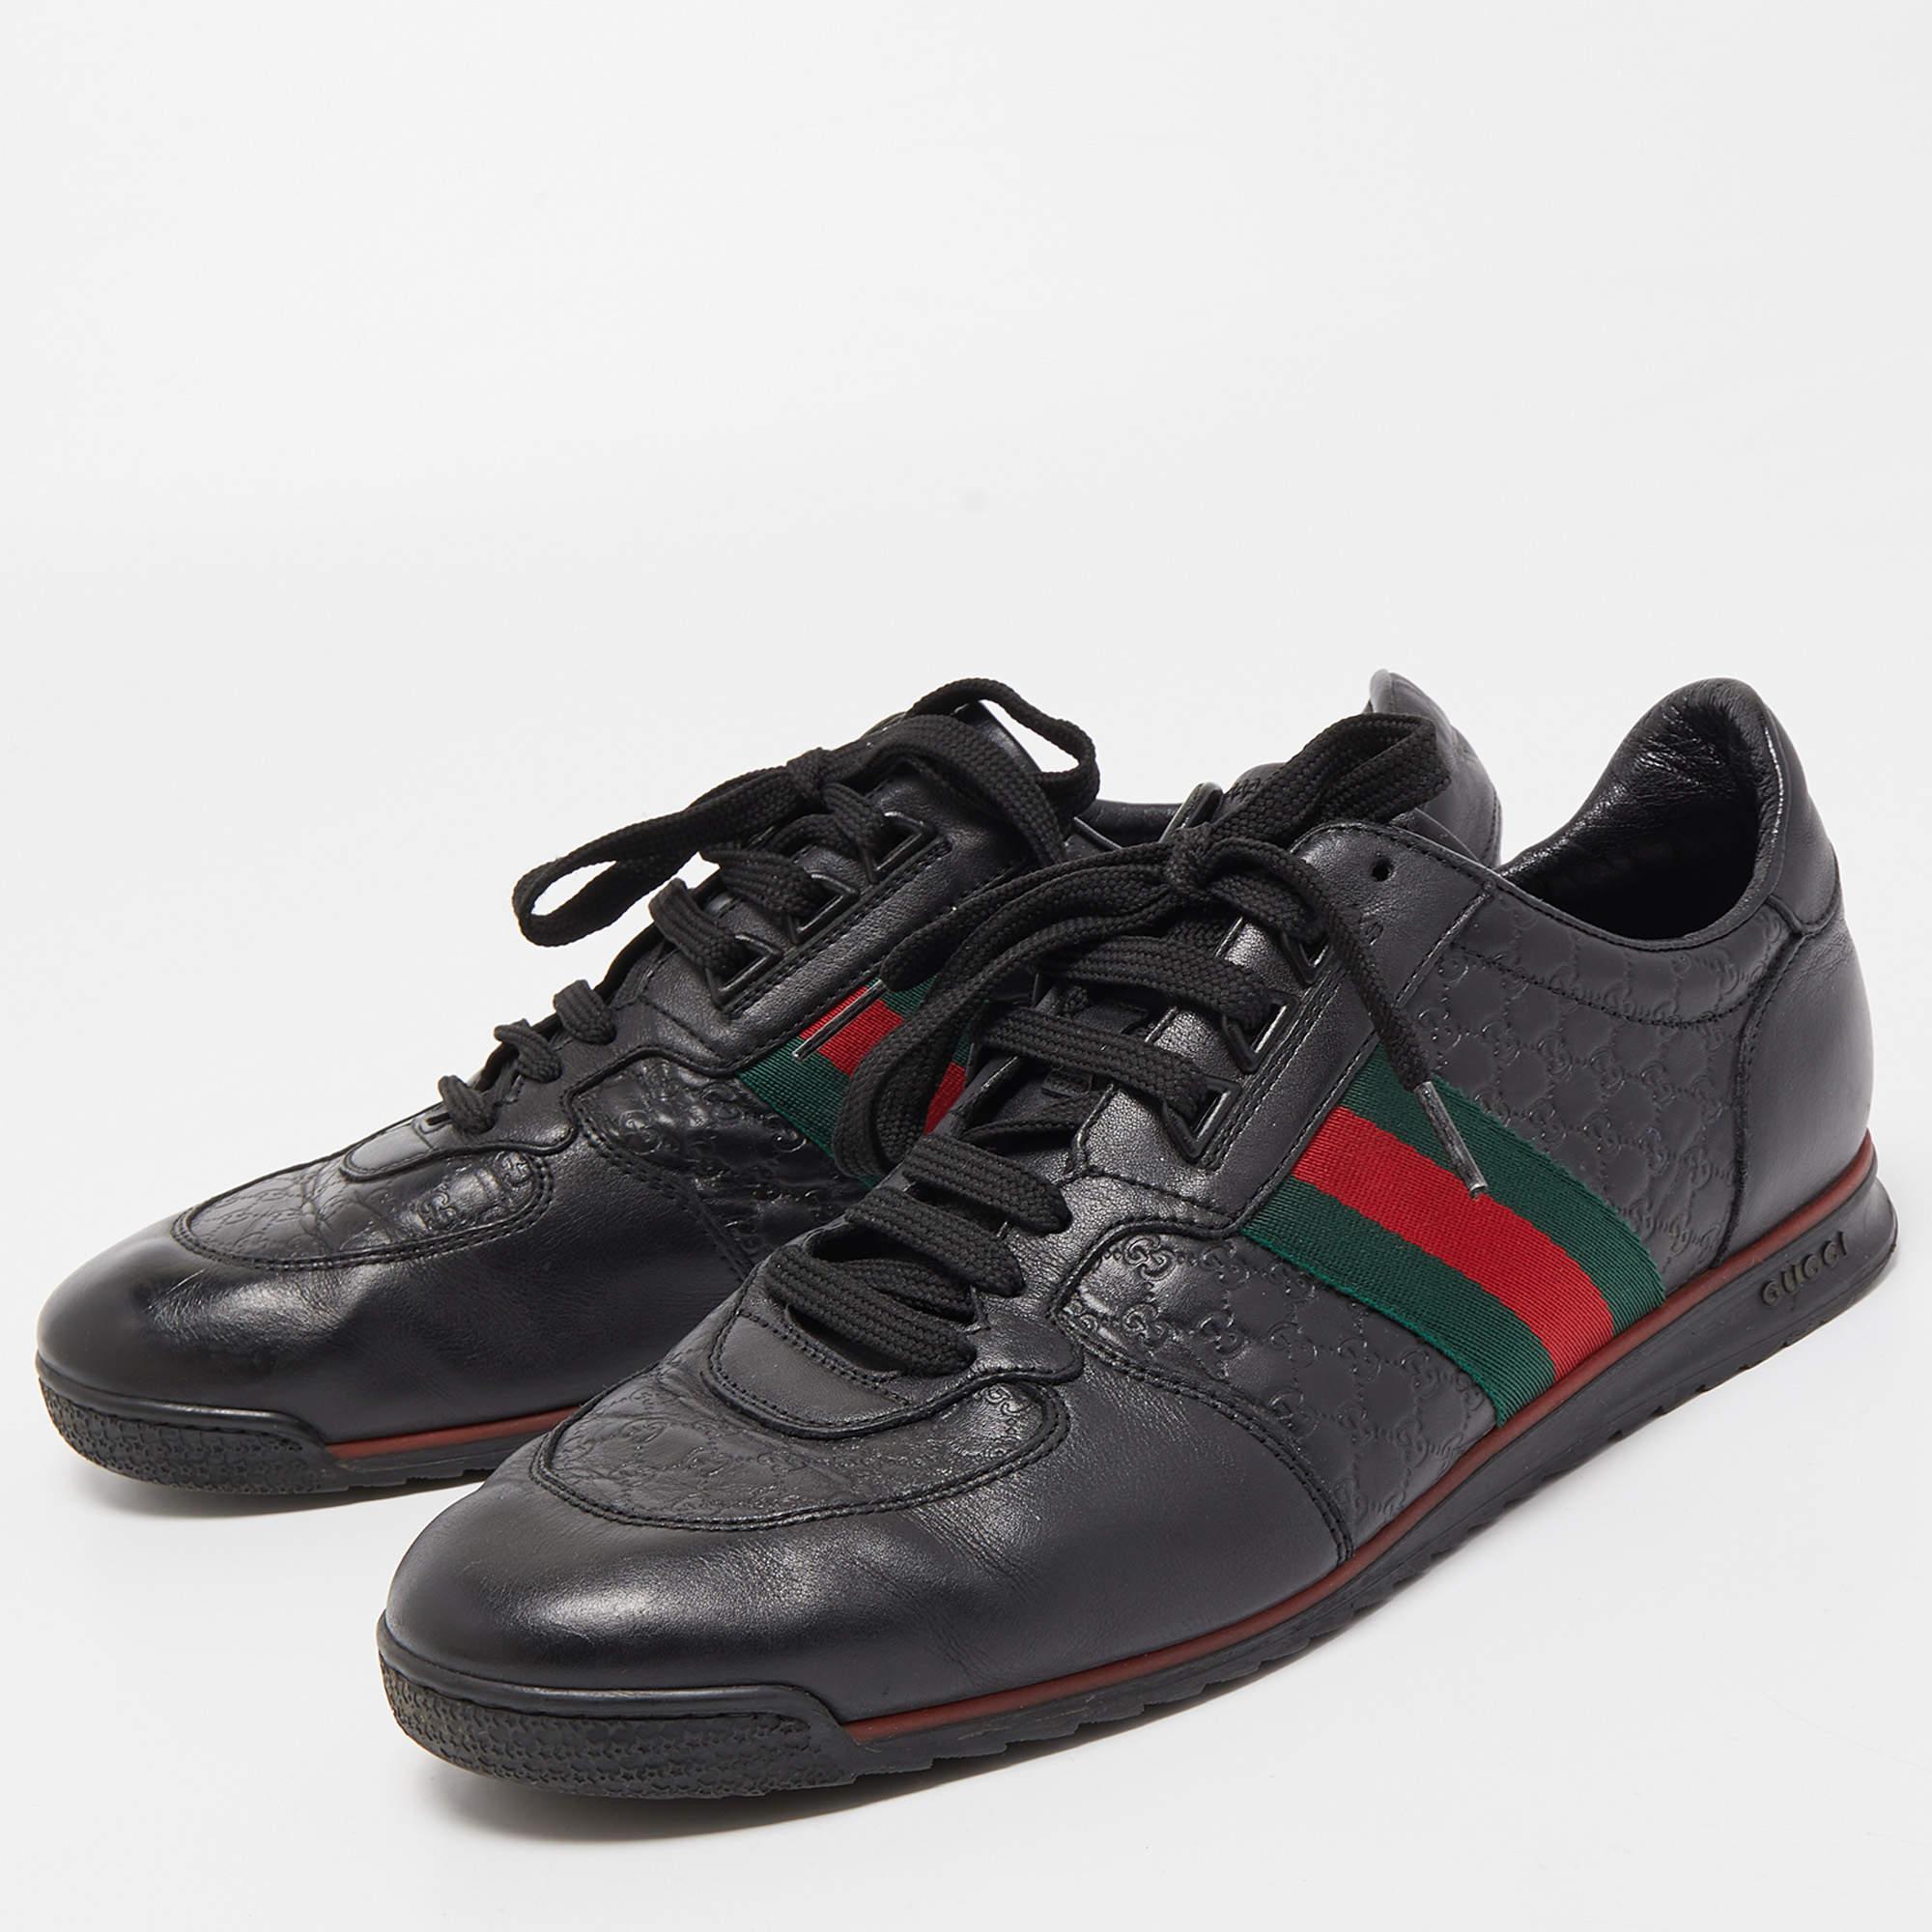 Men's Gucci Black Guccissima Leather Web Low Top Sneakers Size 44